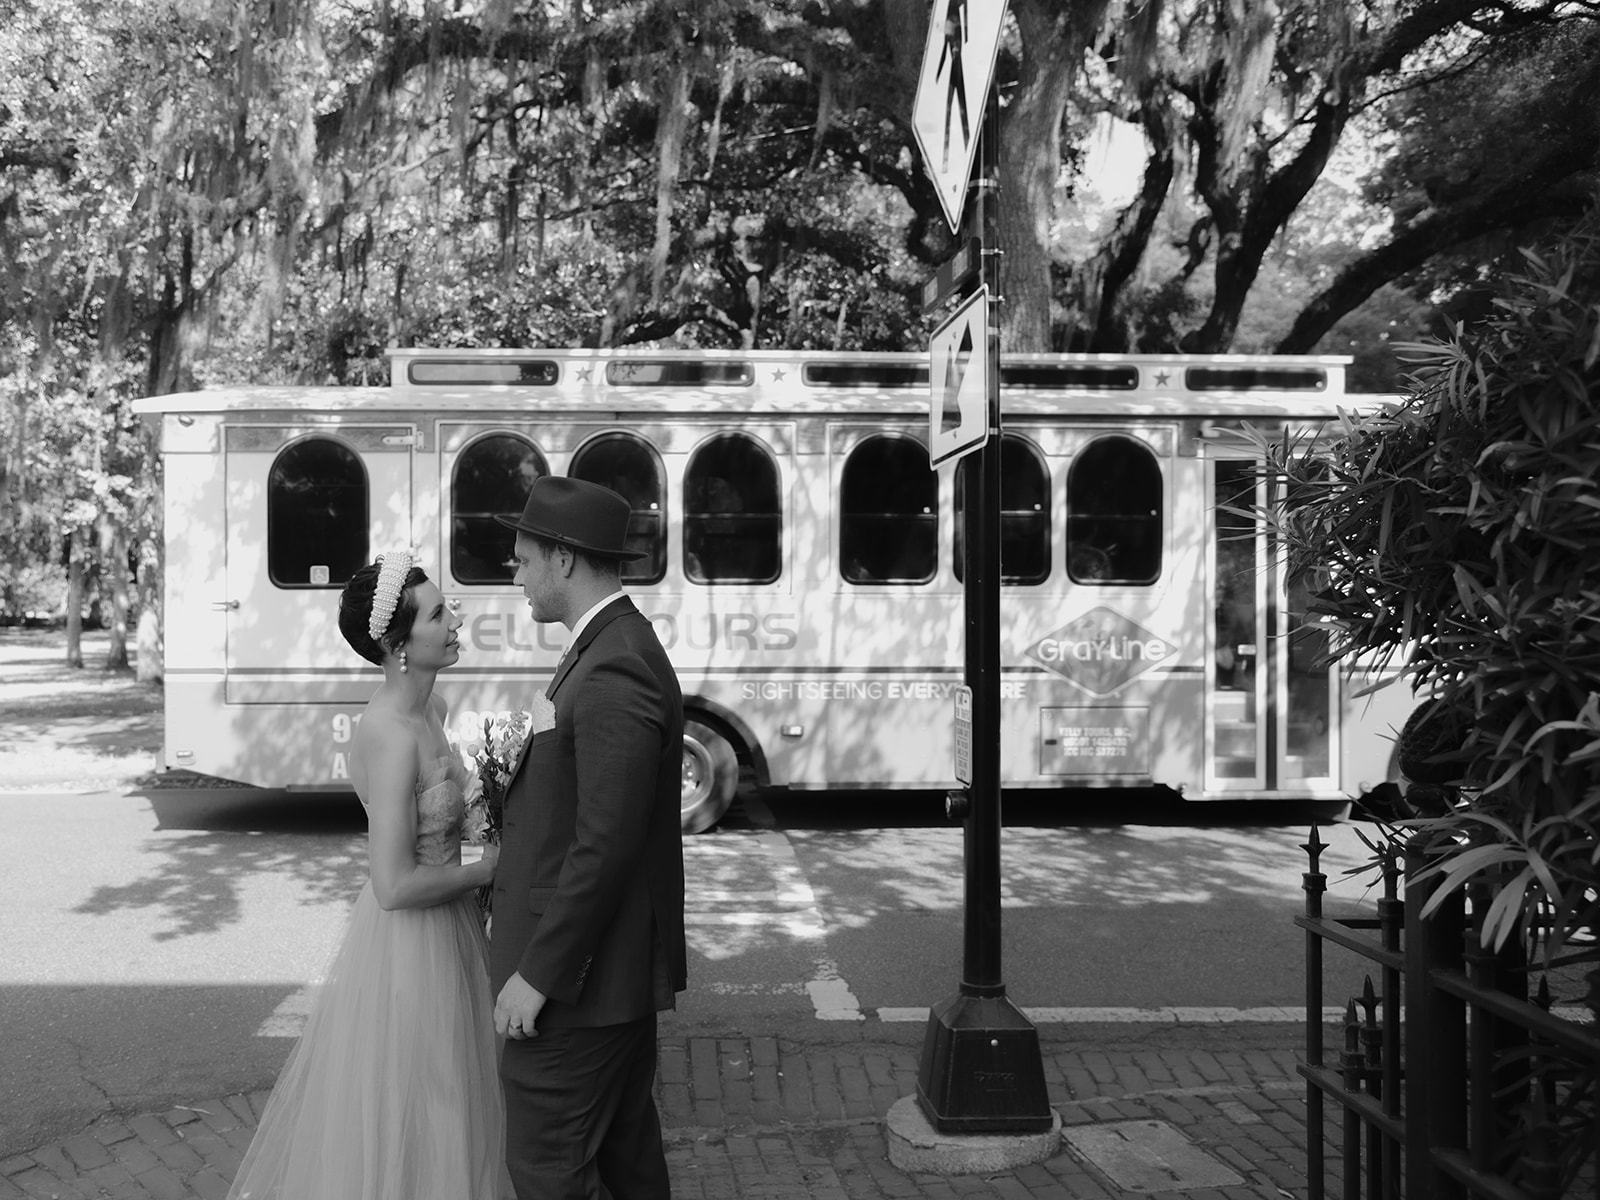 A Savannah street car passes by in the background where this couple has just eloped in the streets